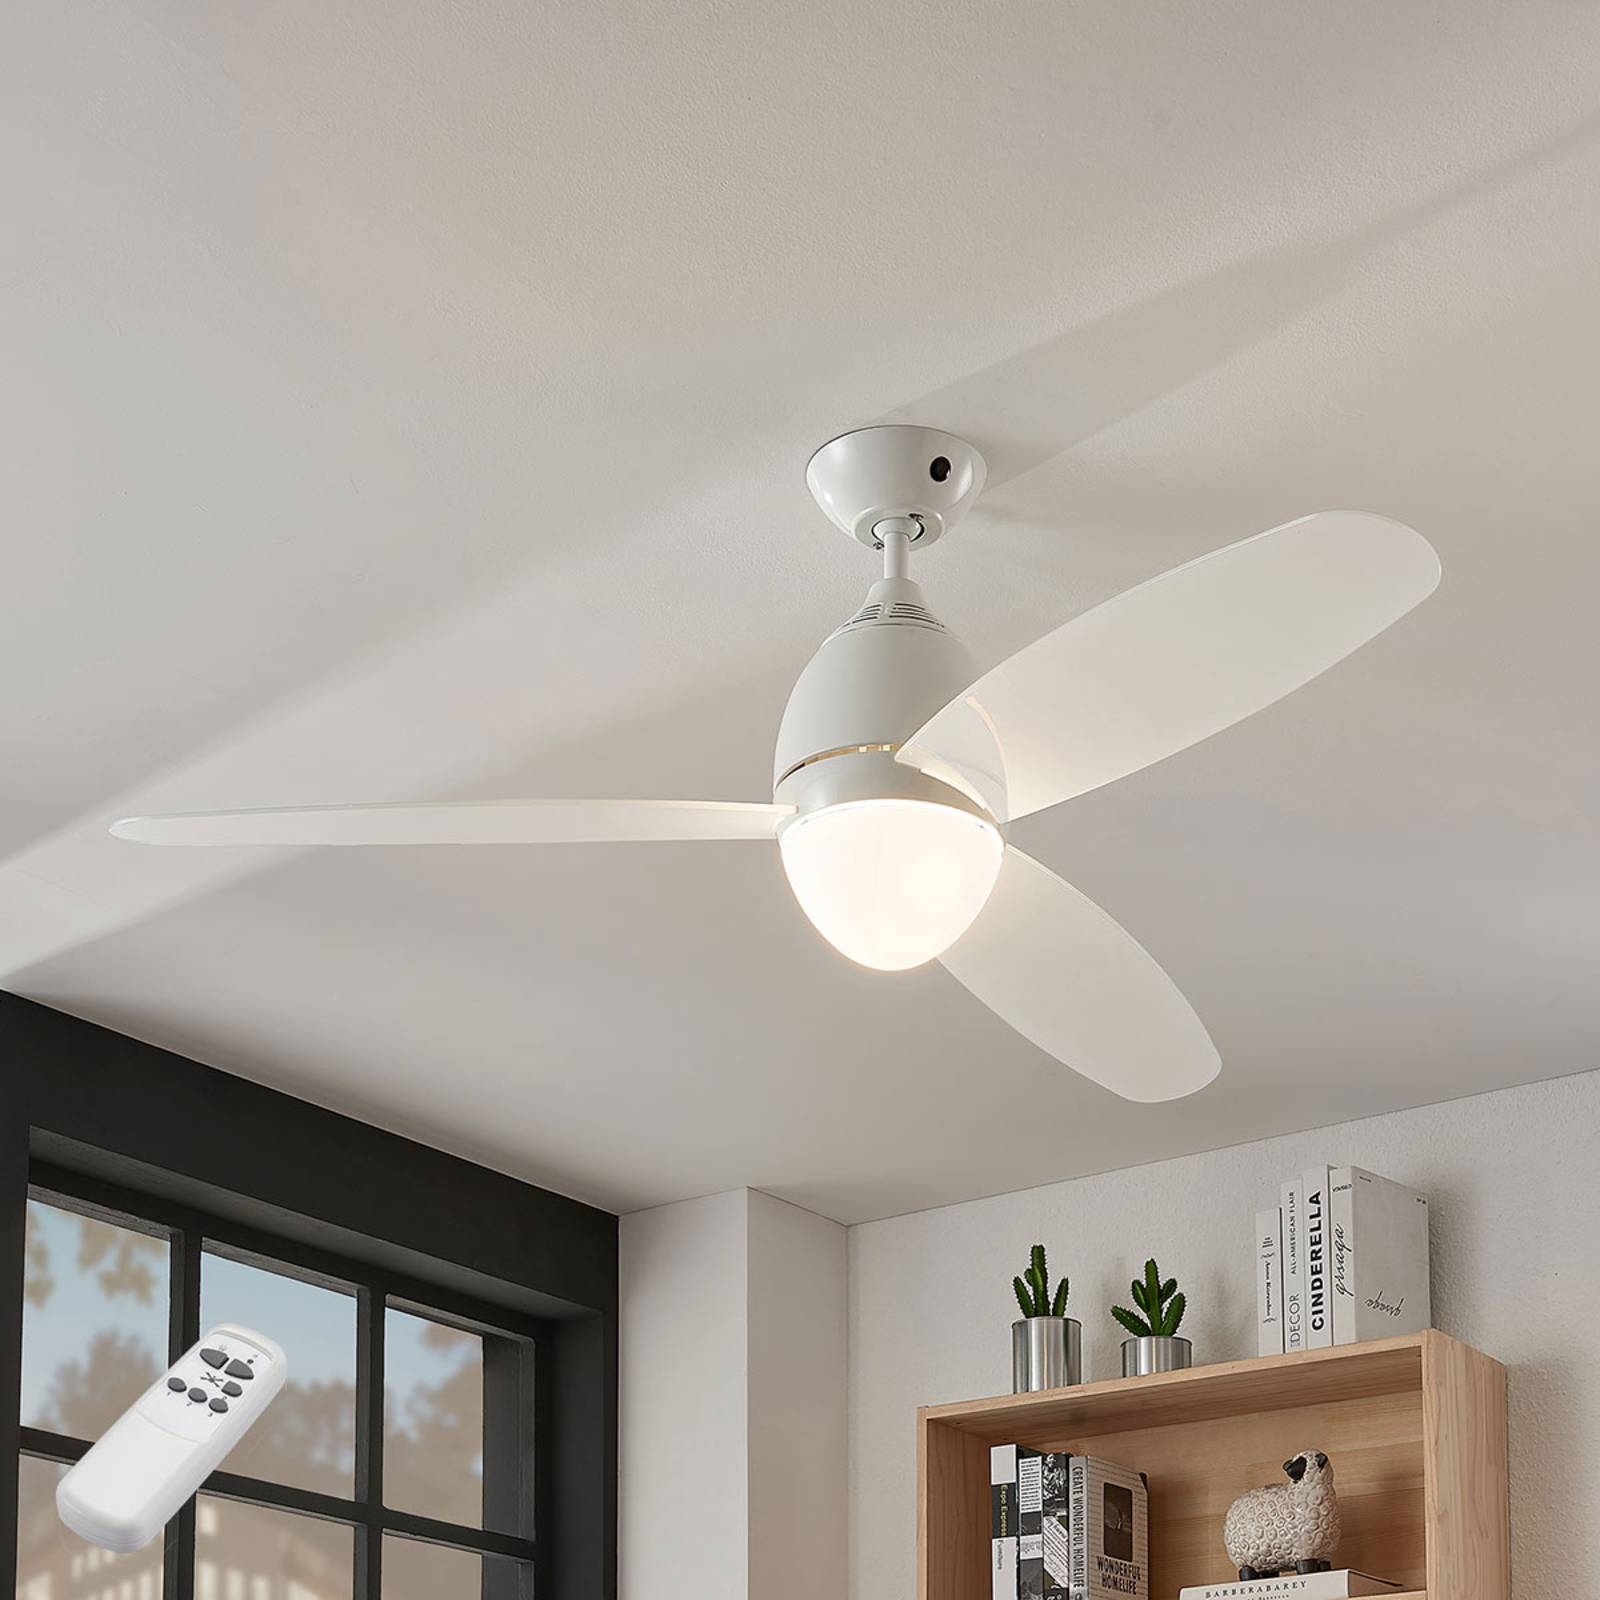 Piara ceiling fan with light, glossy white